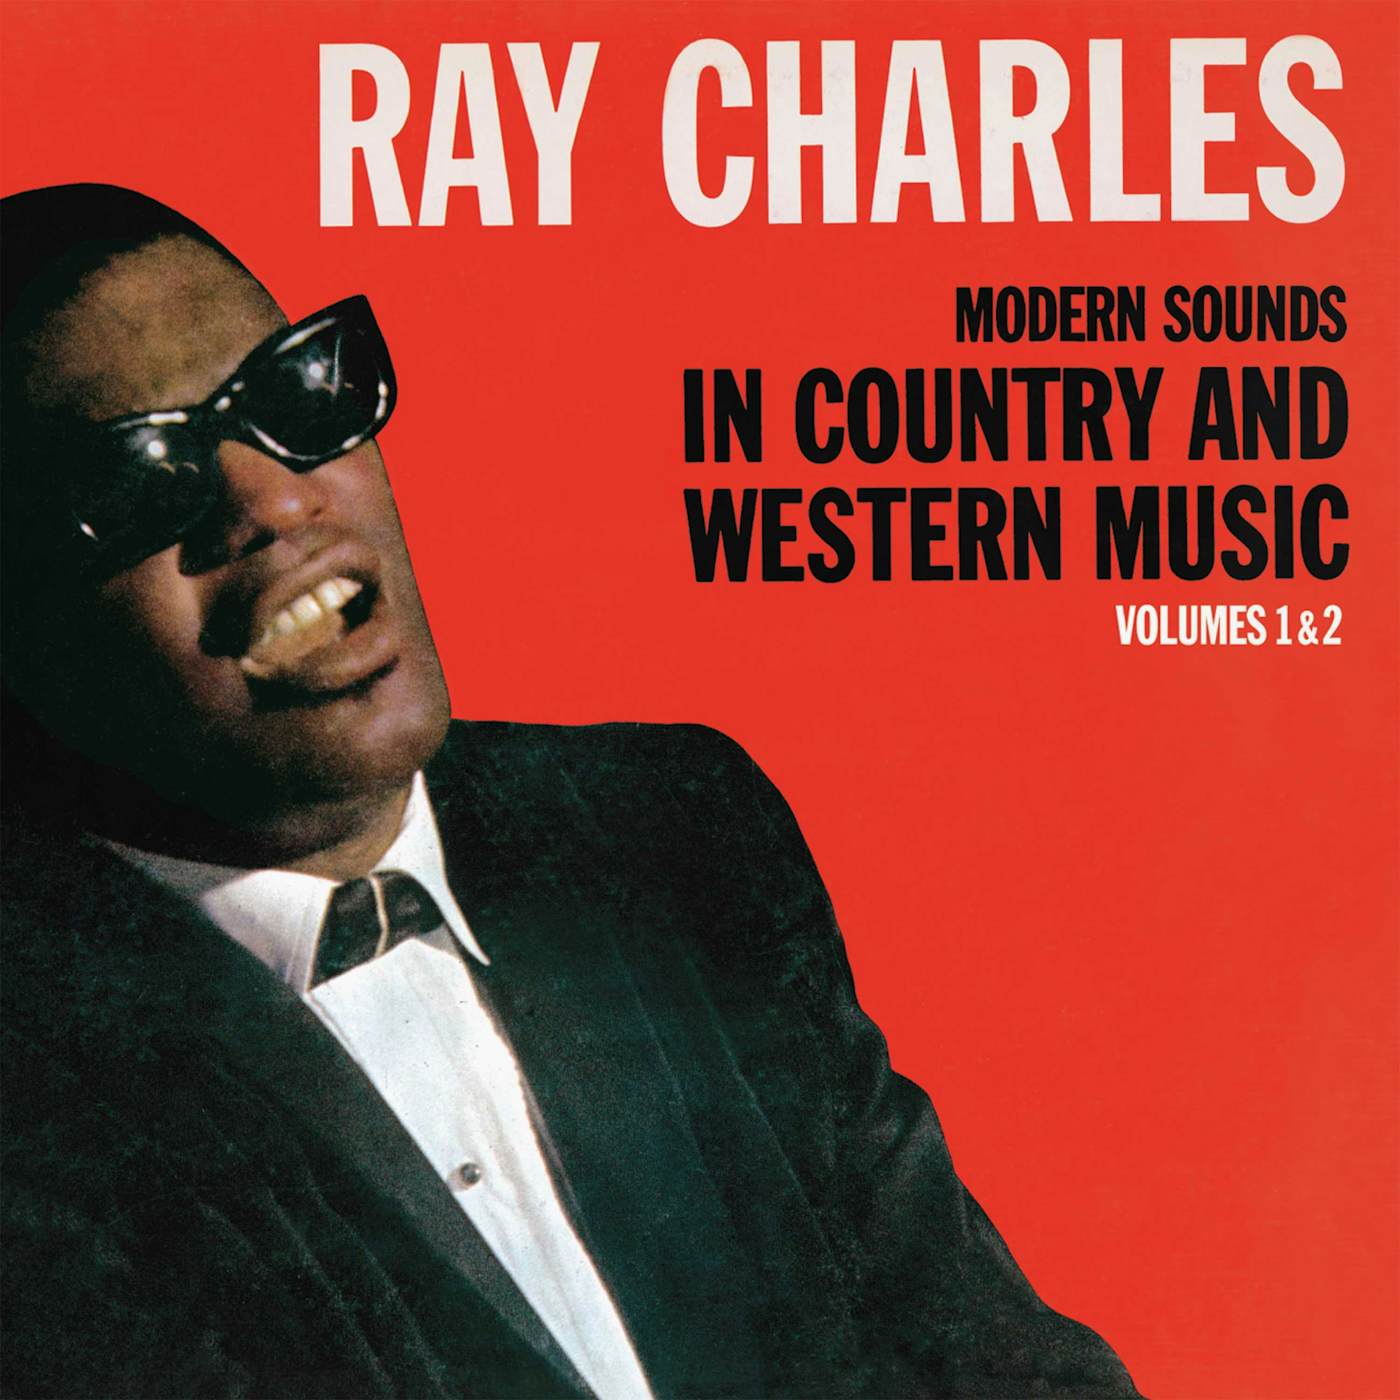 Ray Charles MODERN SOUNDS IN COUNTRY & WESTERN MUSIC, VOL. 1 & 2 (2LP) Vinyl Record